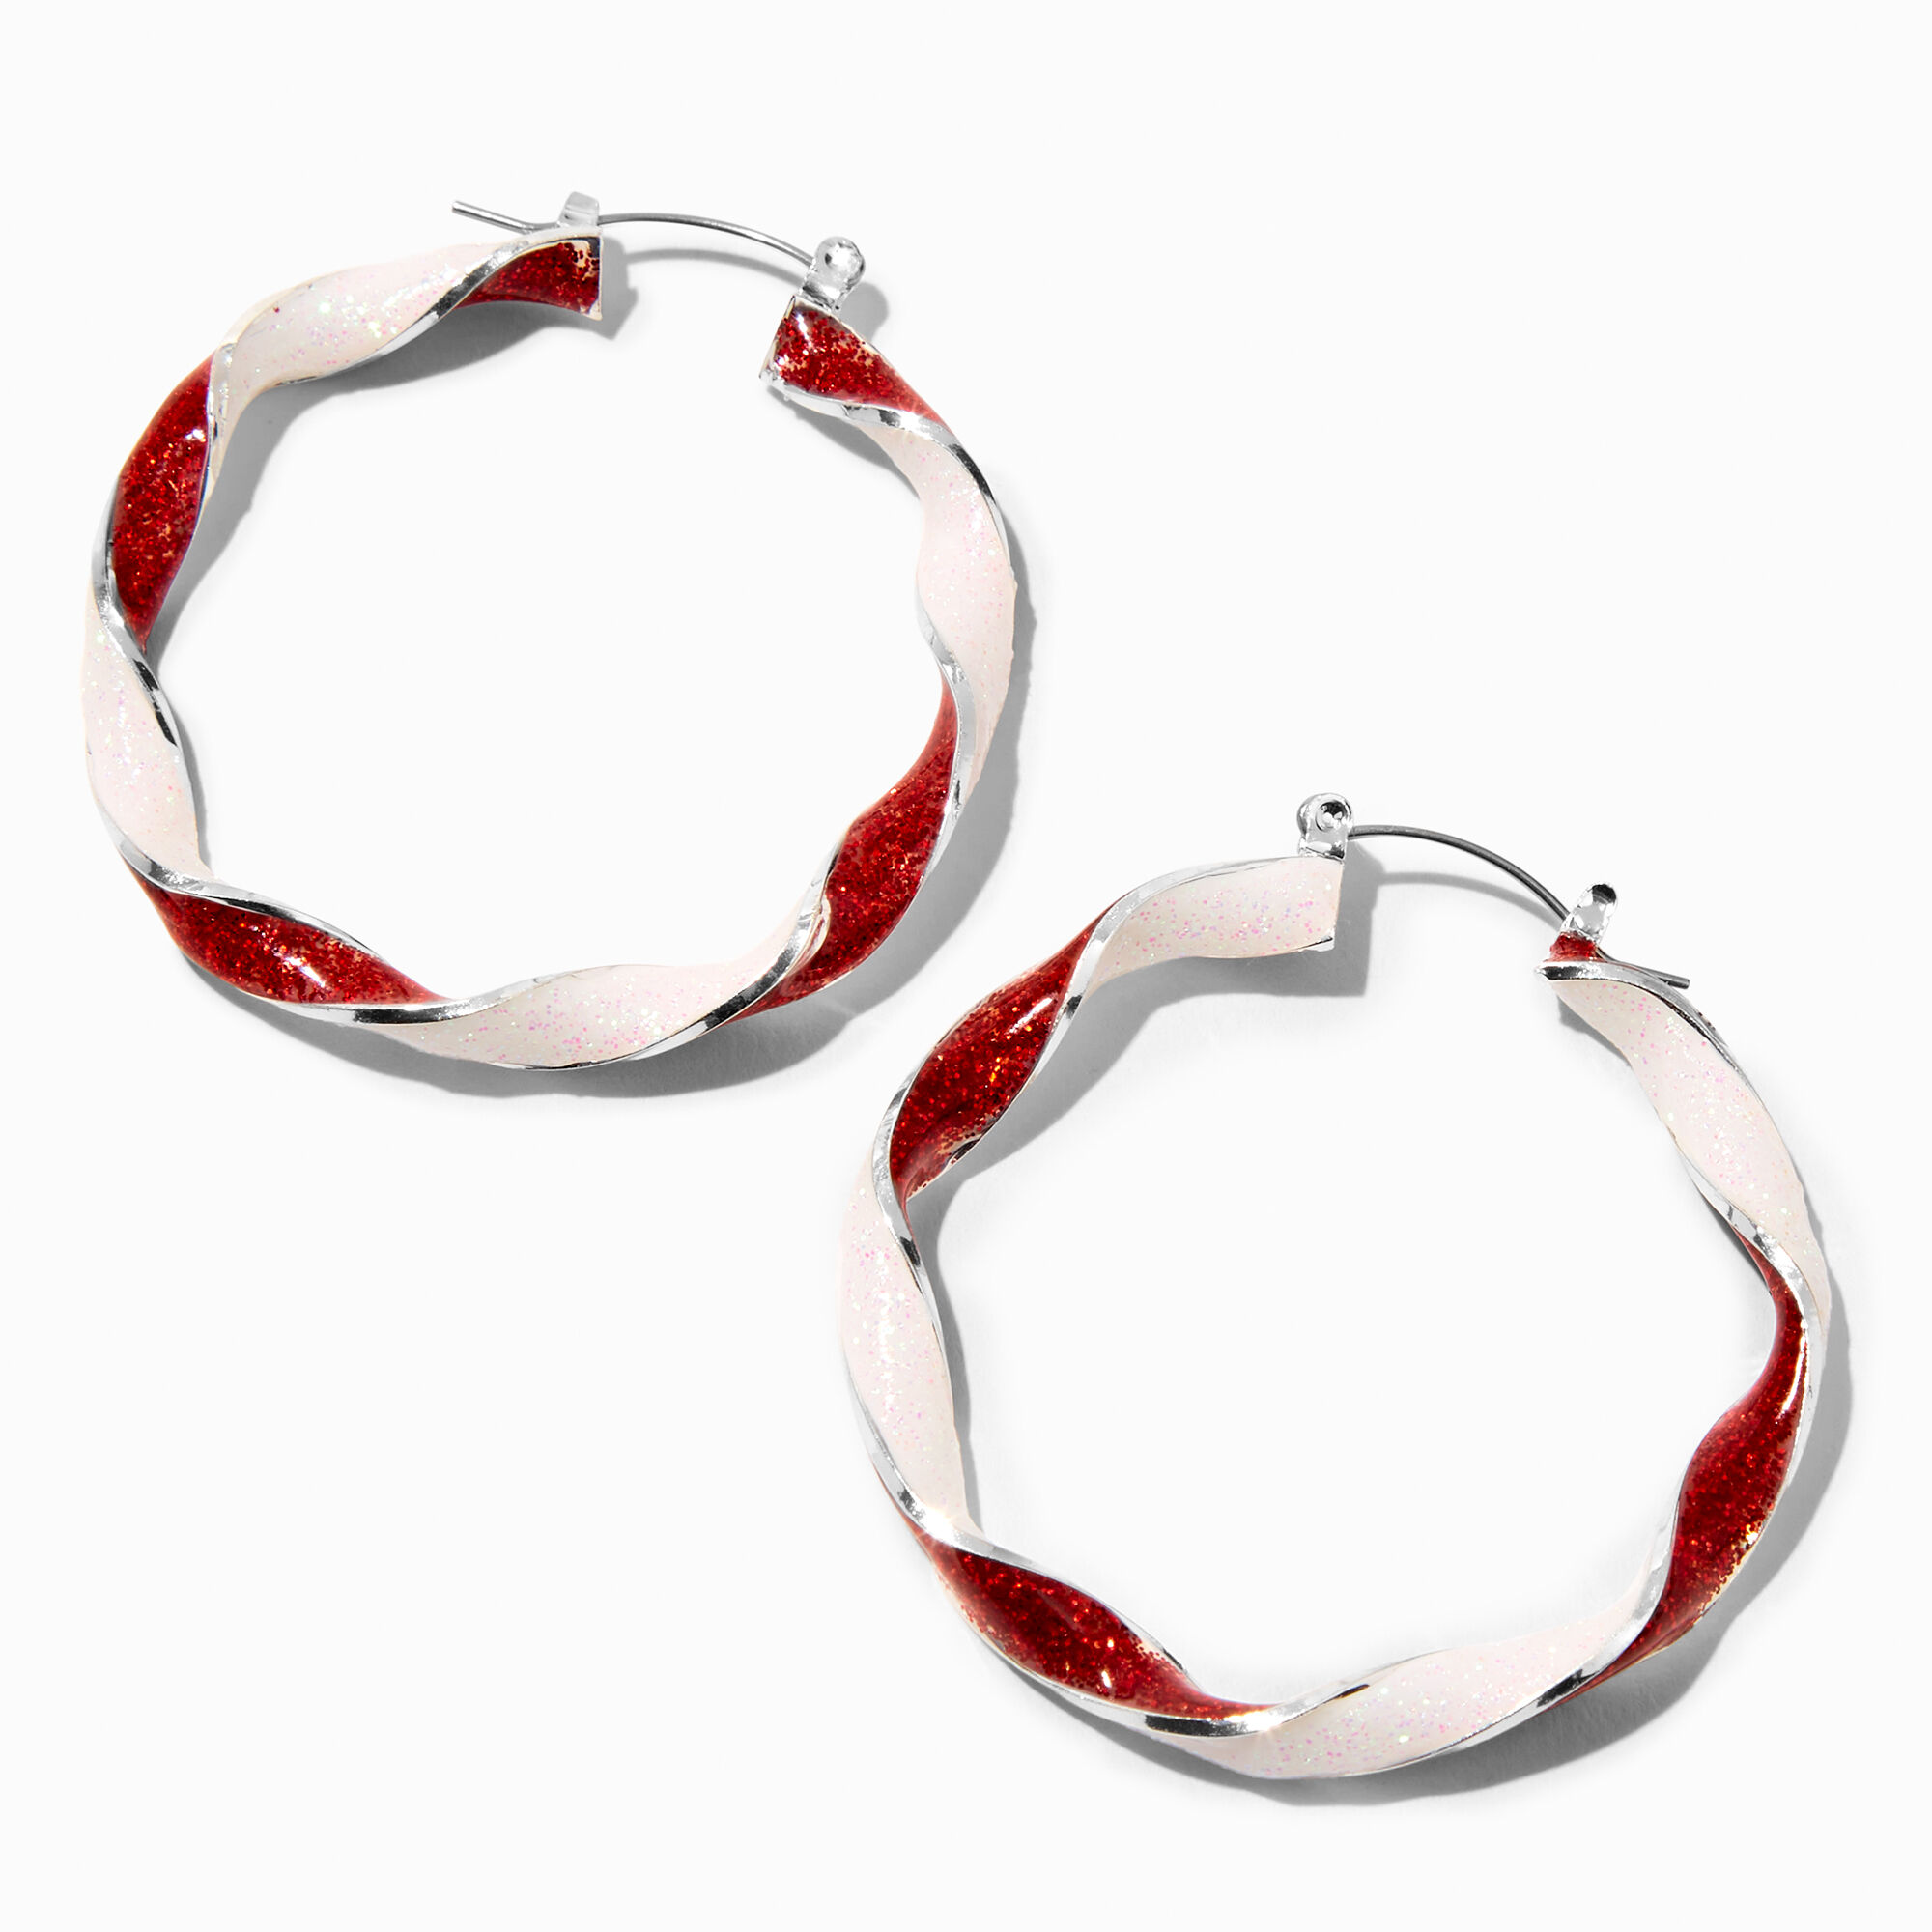 View Claires Candy Cane Twist Glittery Hoop Earrings information